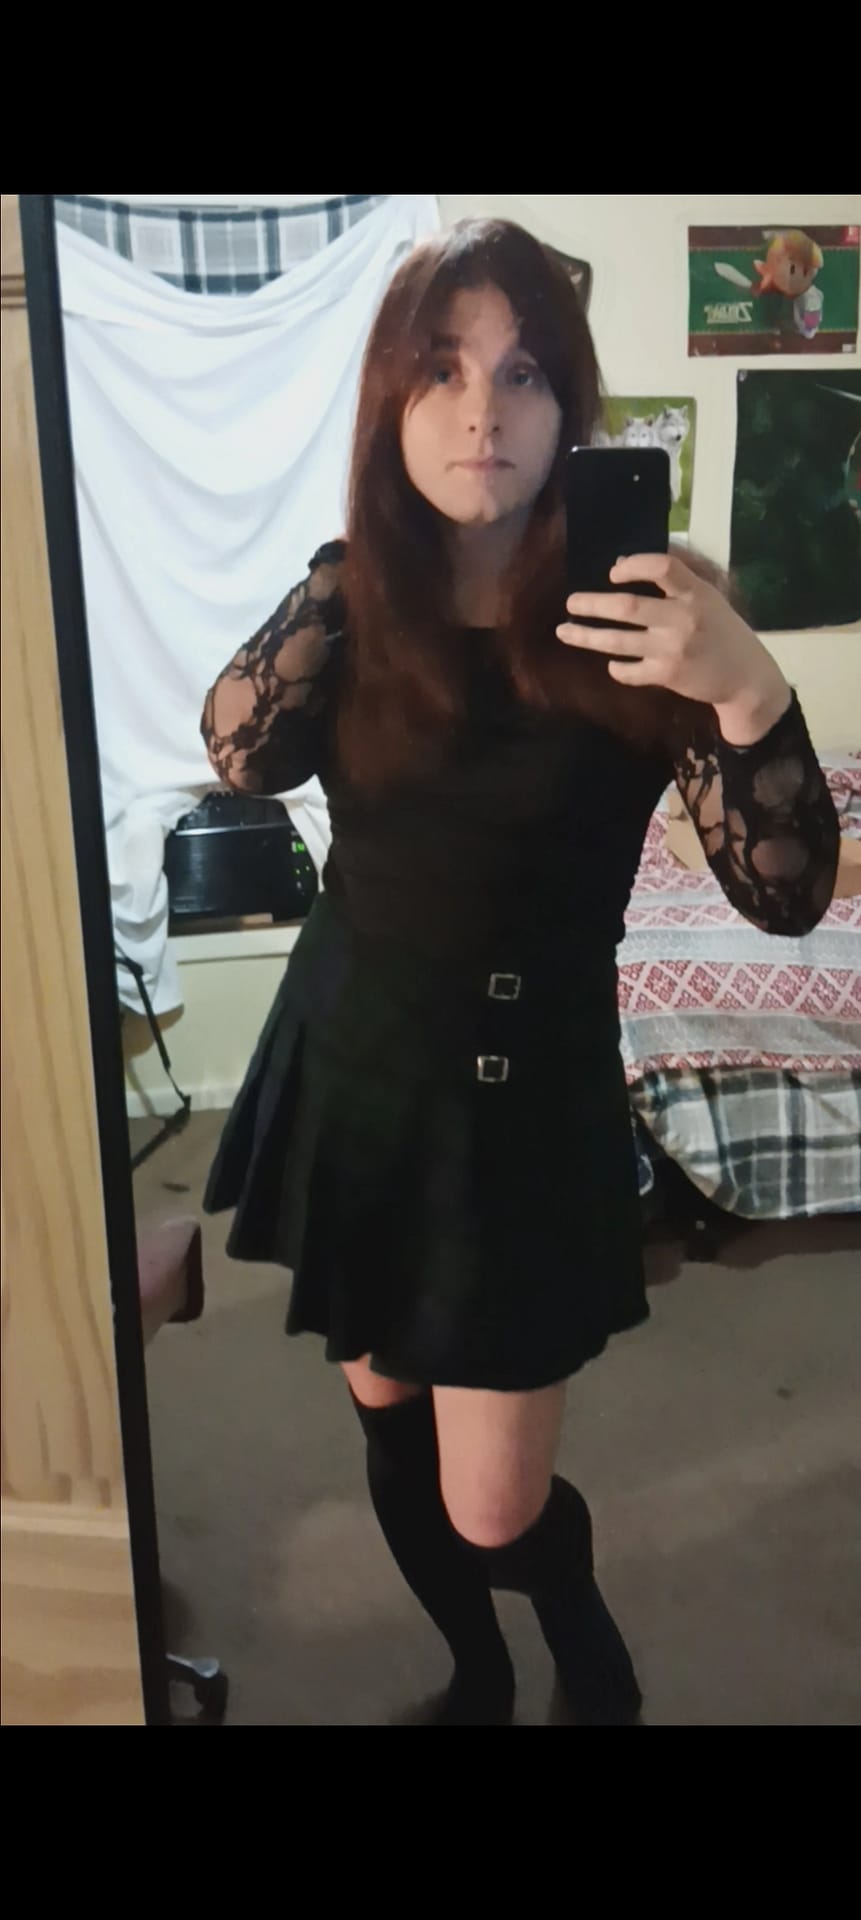 Just had to share with you. :) – Crossdresser Heaven